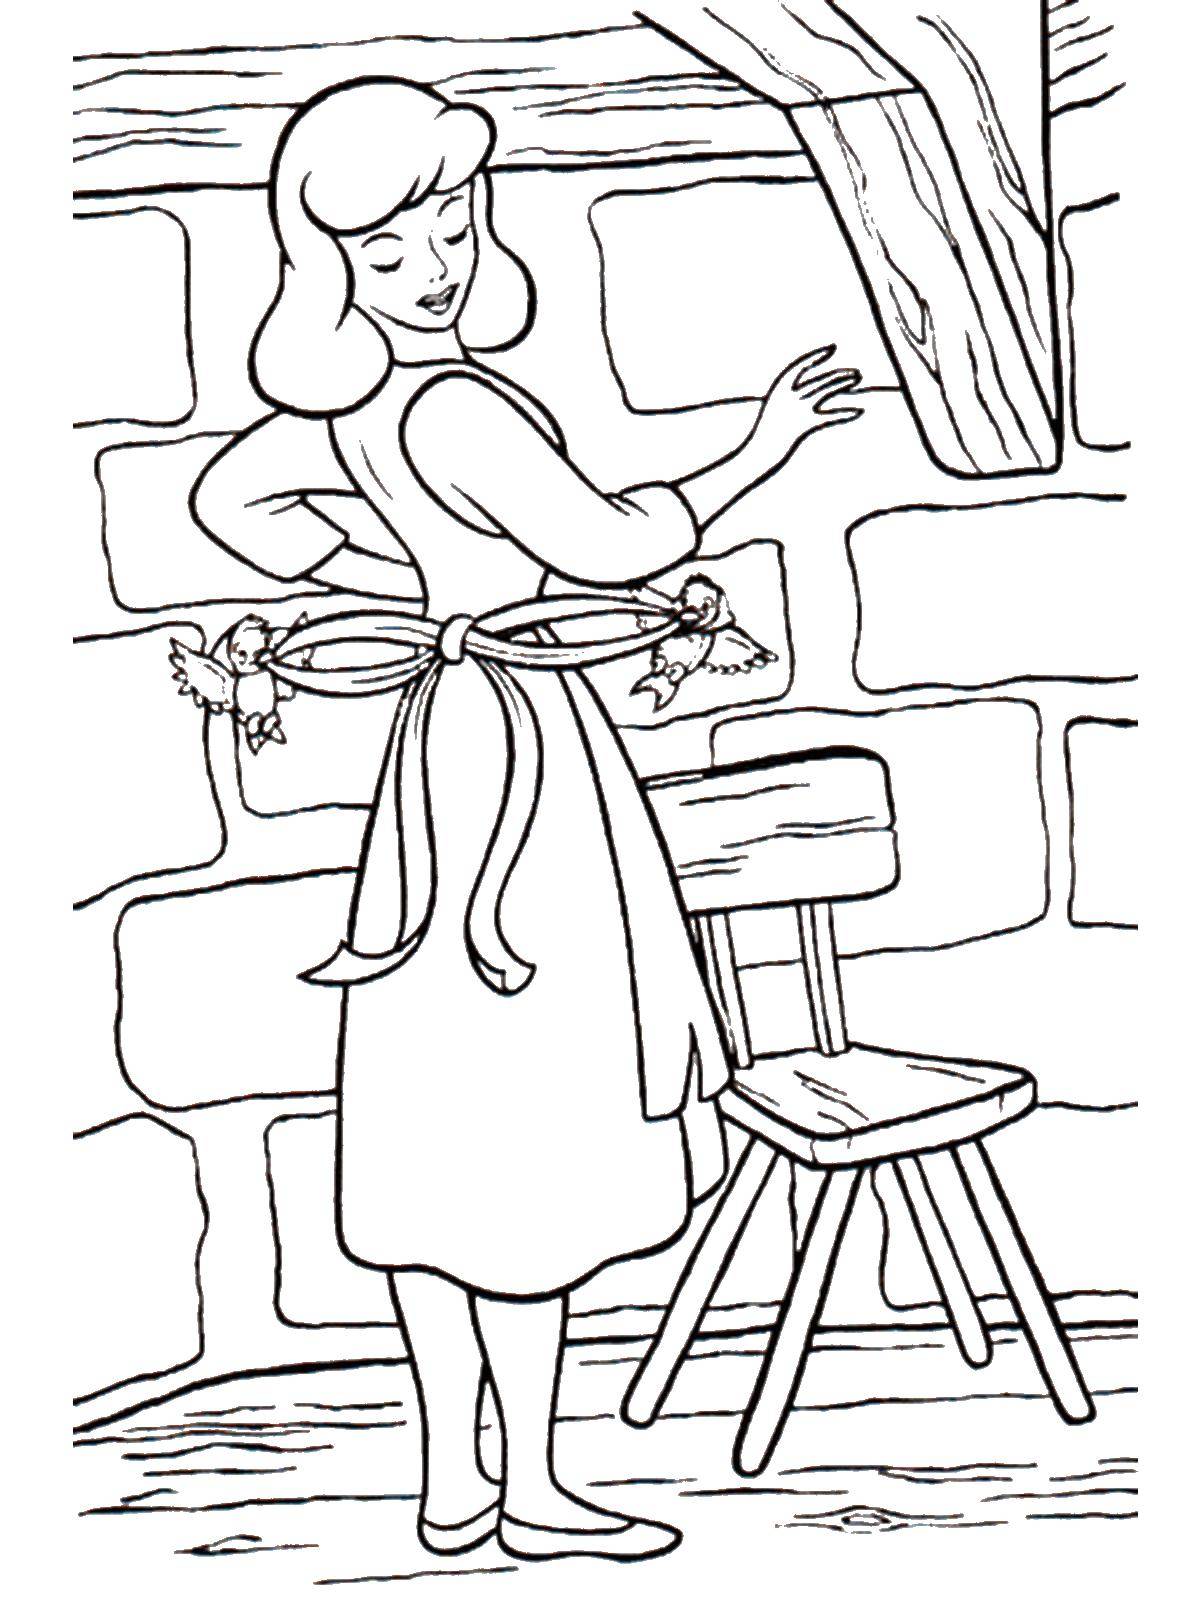 Coloring Cinderella tries on a dress. Category Cinderella. Tags:  Cinderella, fairy.